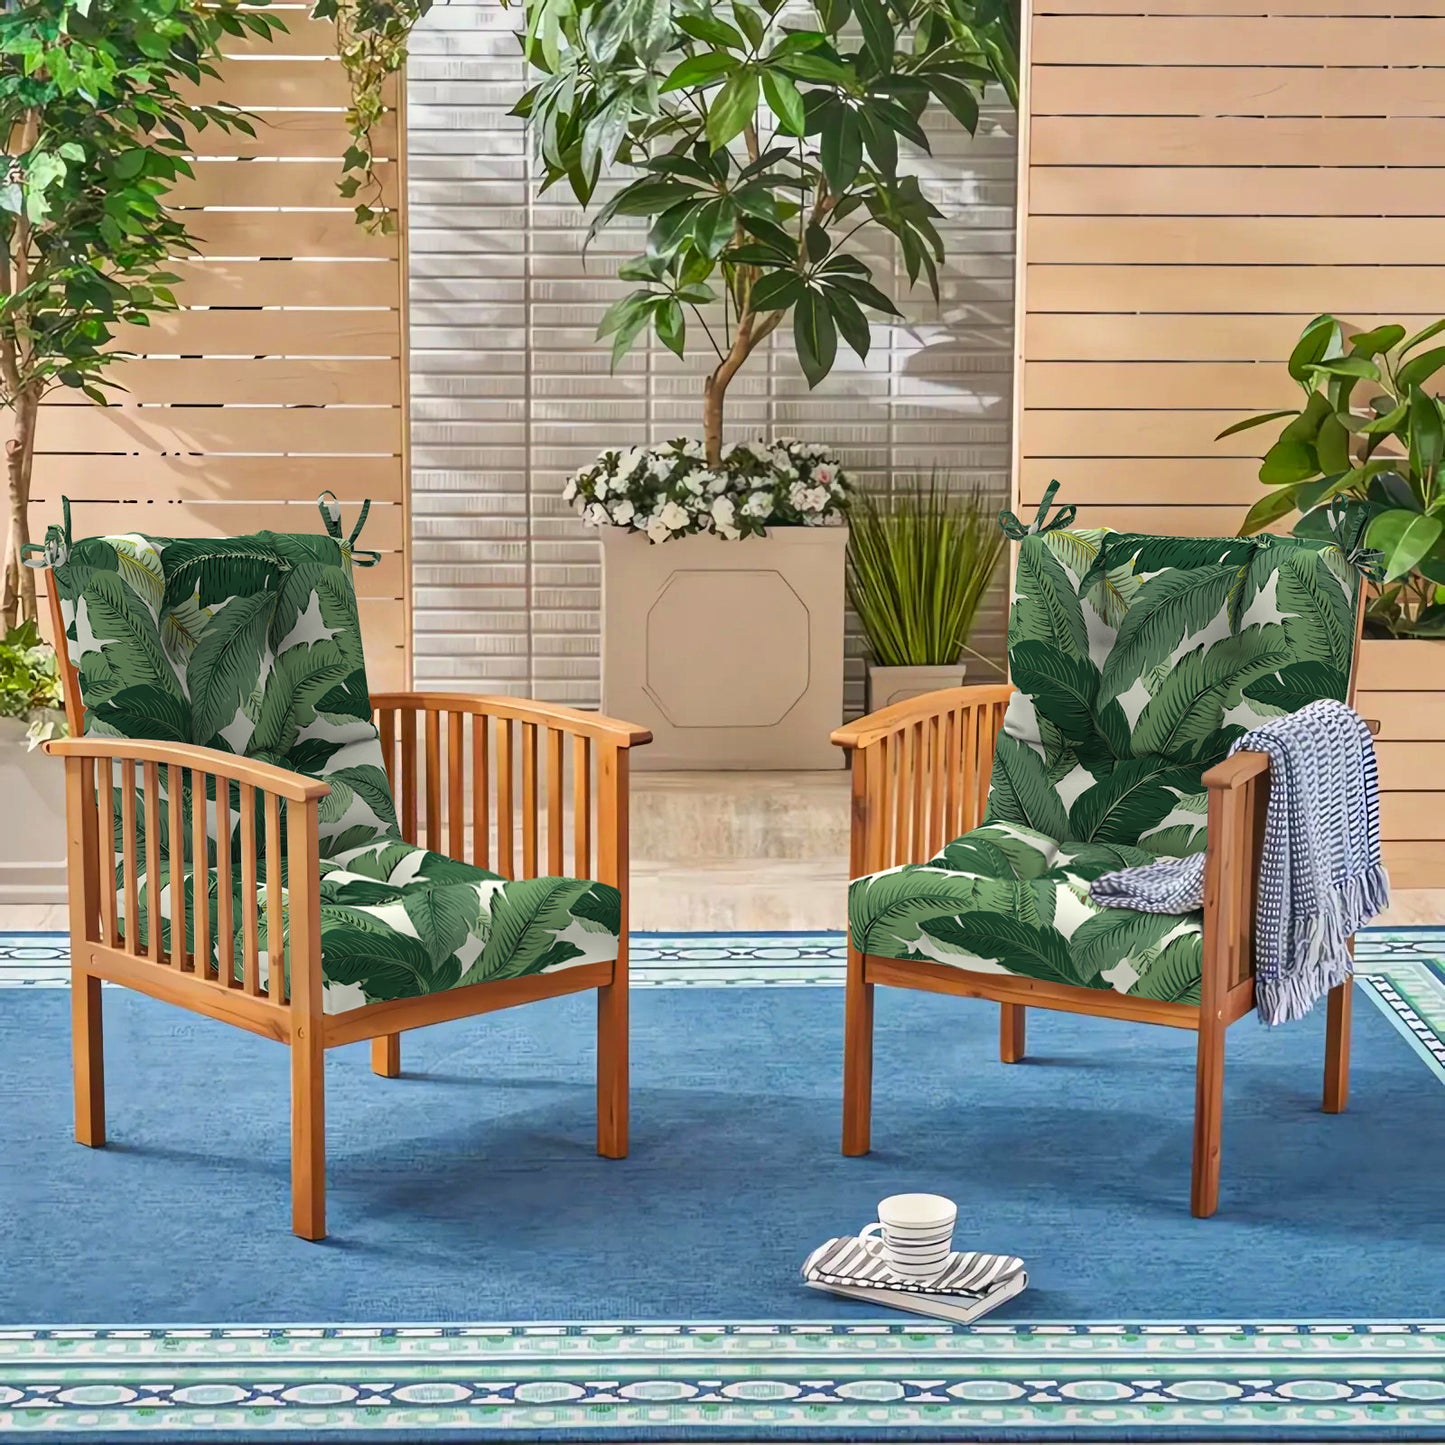 Melody Elephant Indoor/Outdoor Square Tufted Seat Cushions with Ties, Fade Resistant Patio Wicker Thick Chair Pads Pack of 2, 19 x 19 x 5 Inch, Swaying Palms Green